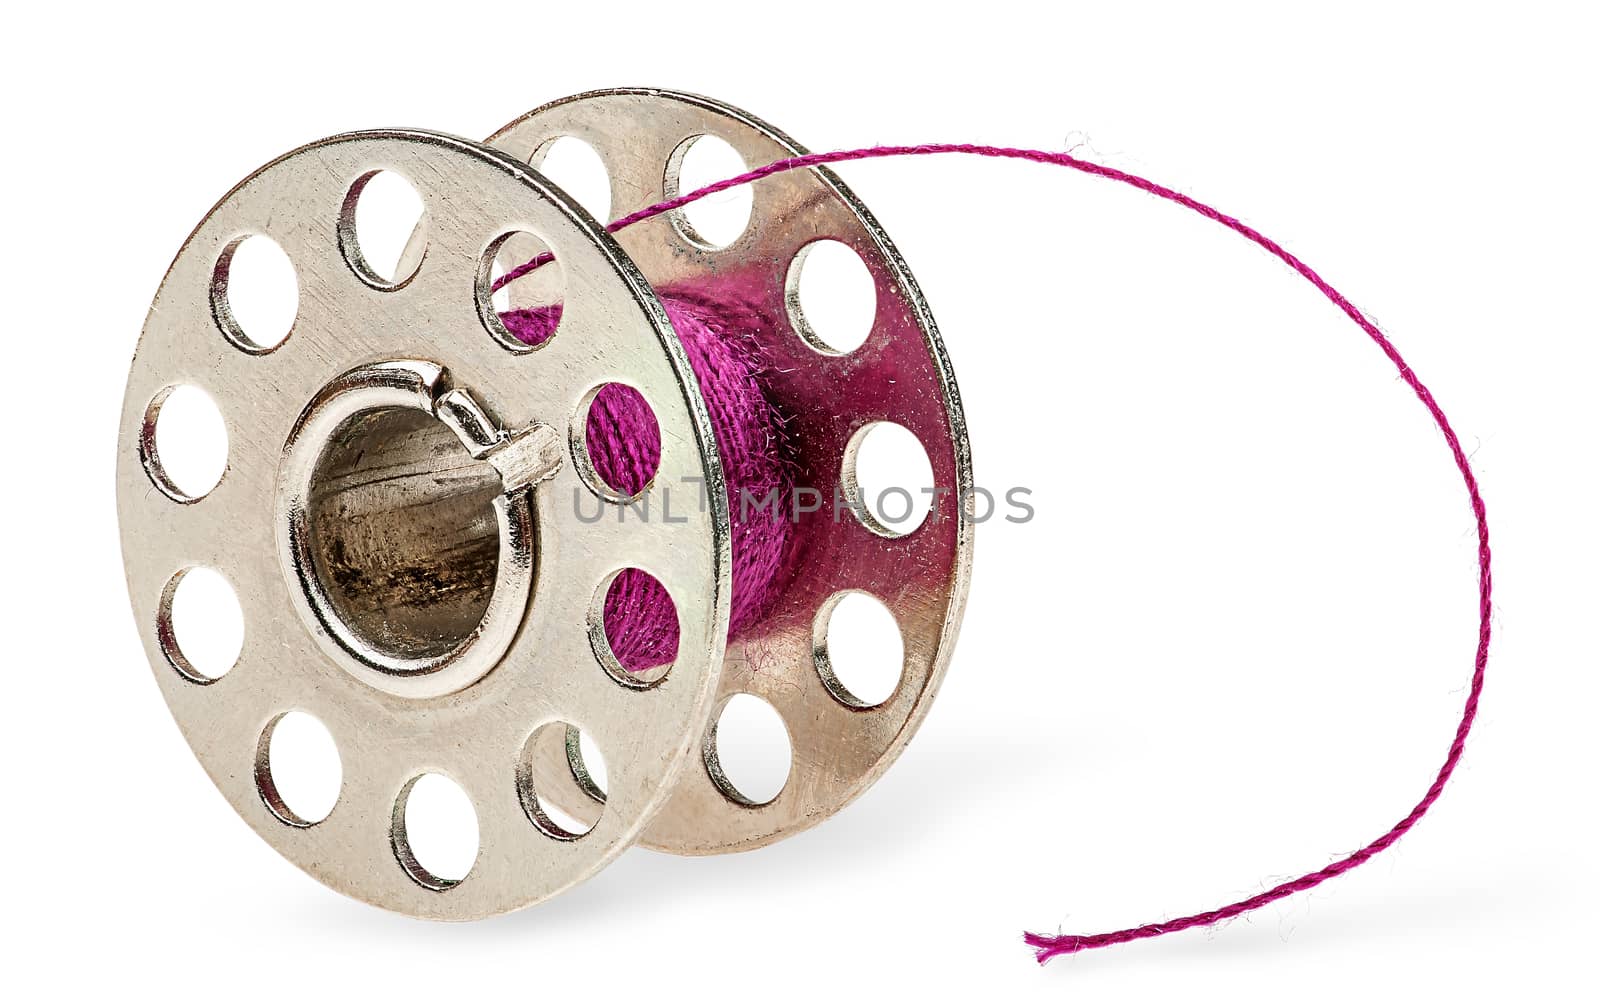 Metal spool with burgundy thread isolated on white background